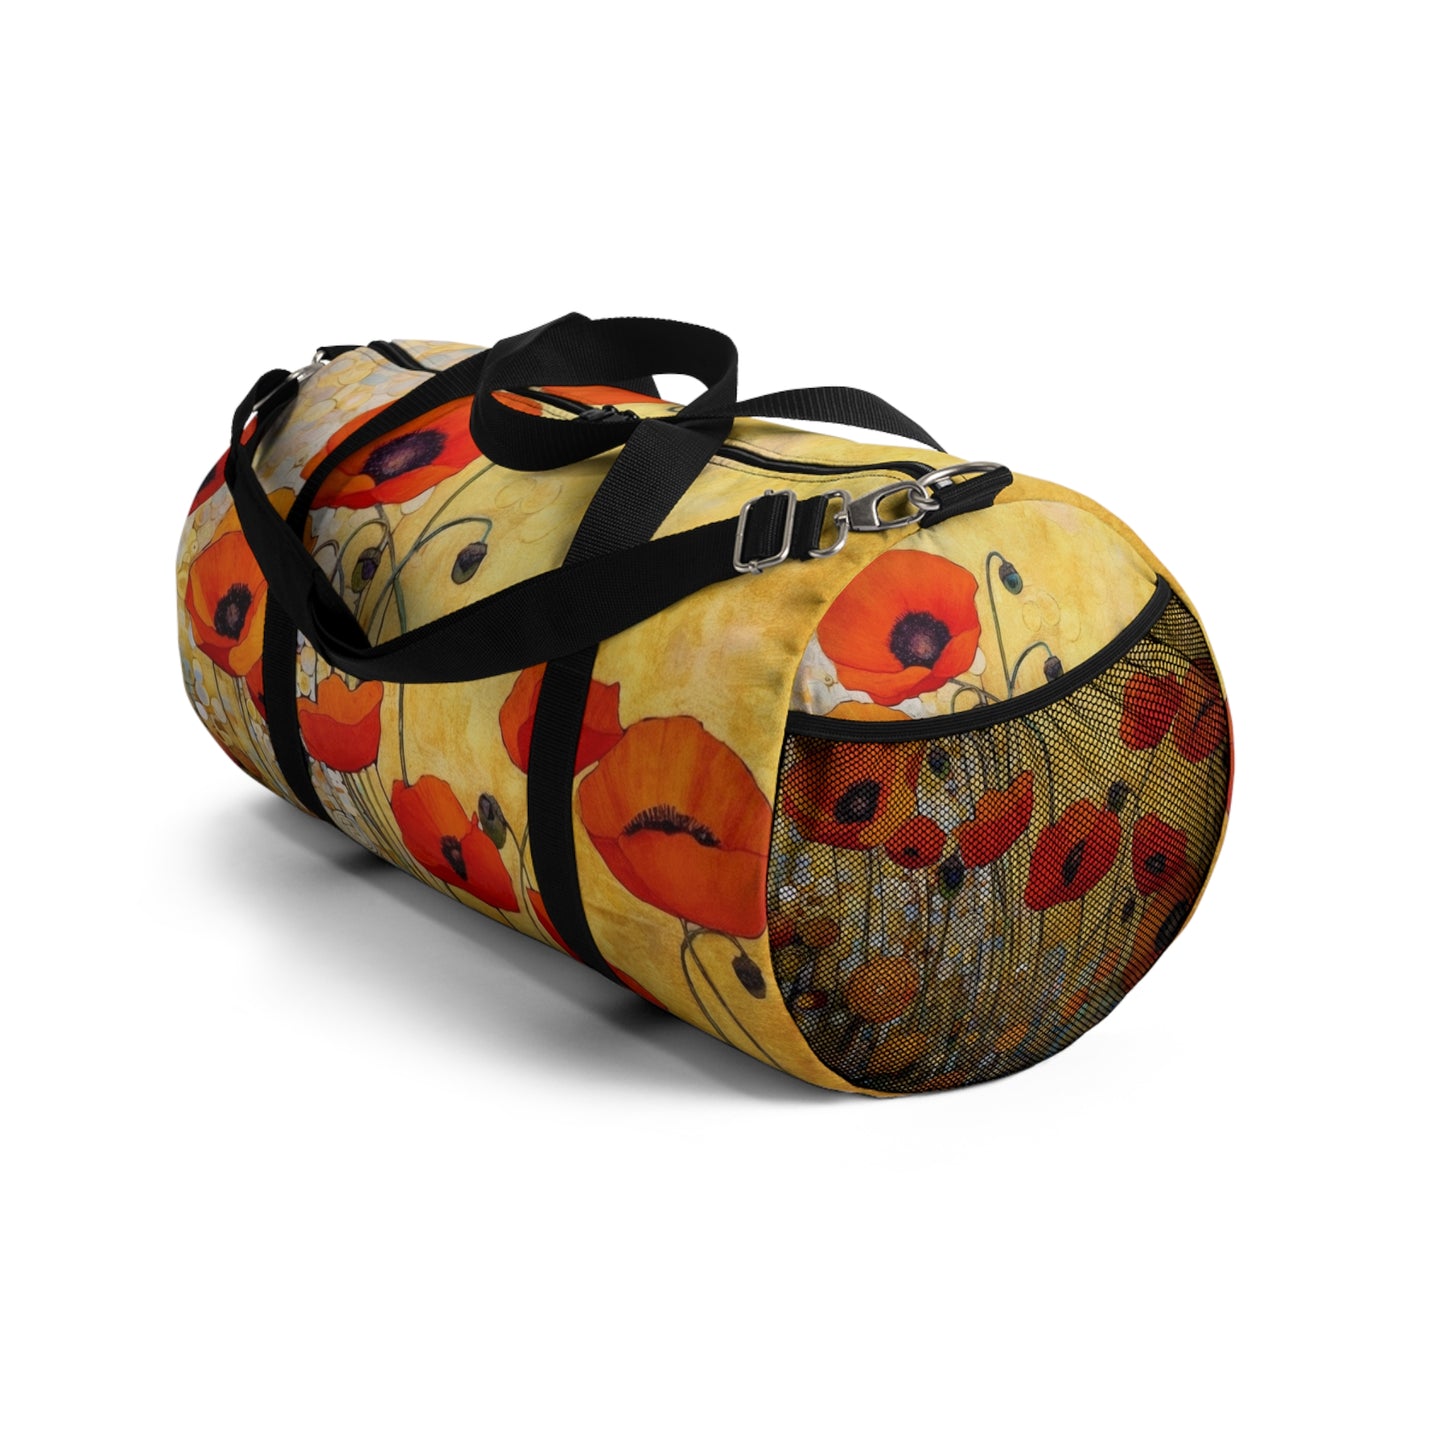 Elevate Your Style: Duffel Bag Adorned with Gustav Klimt's Poppies